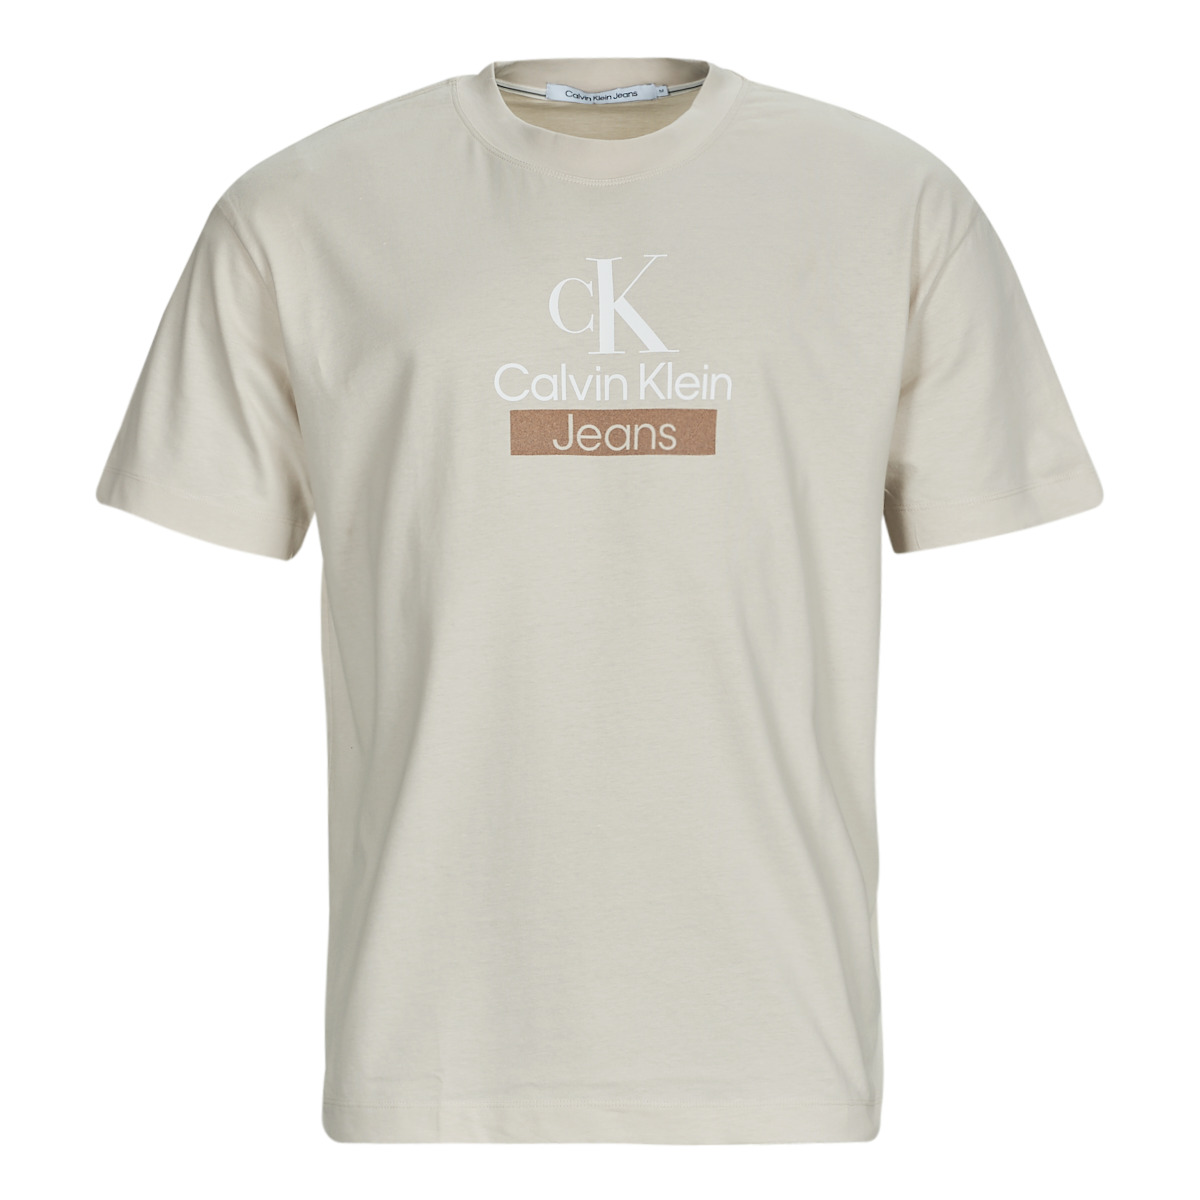 Calvin Klein Jeans STACKED ARCHIVAL TEE Beige - Free delivery | Spartoo NET  ! - Clothing short-sleeved t-shirts Men